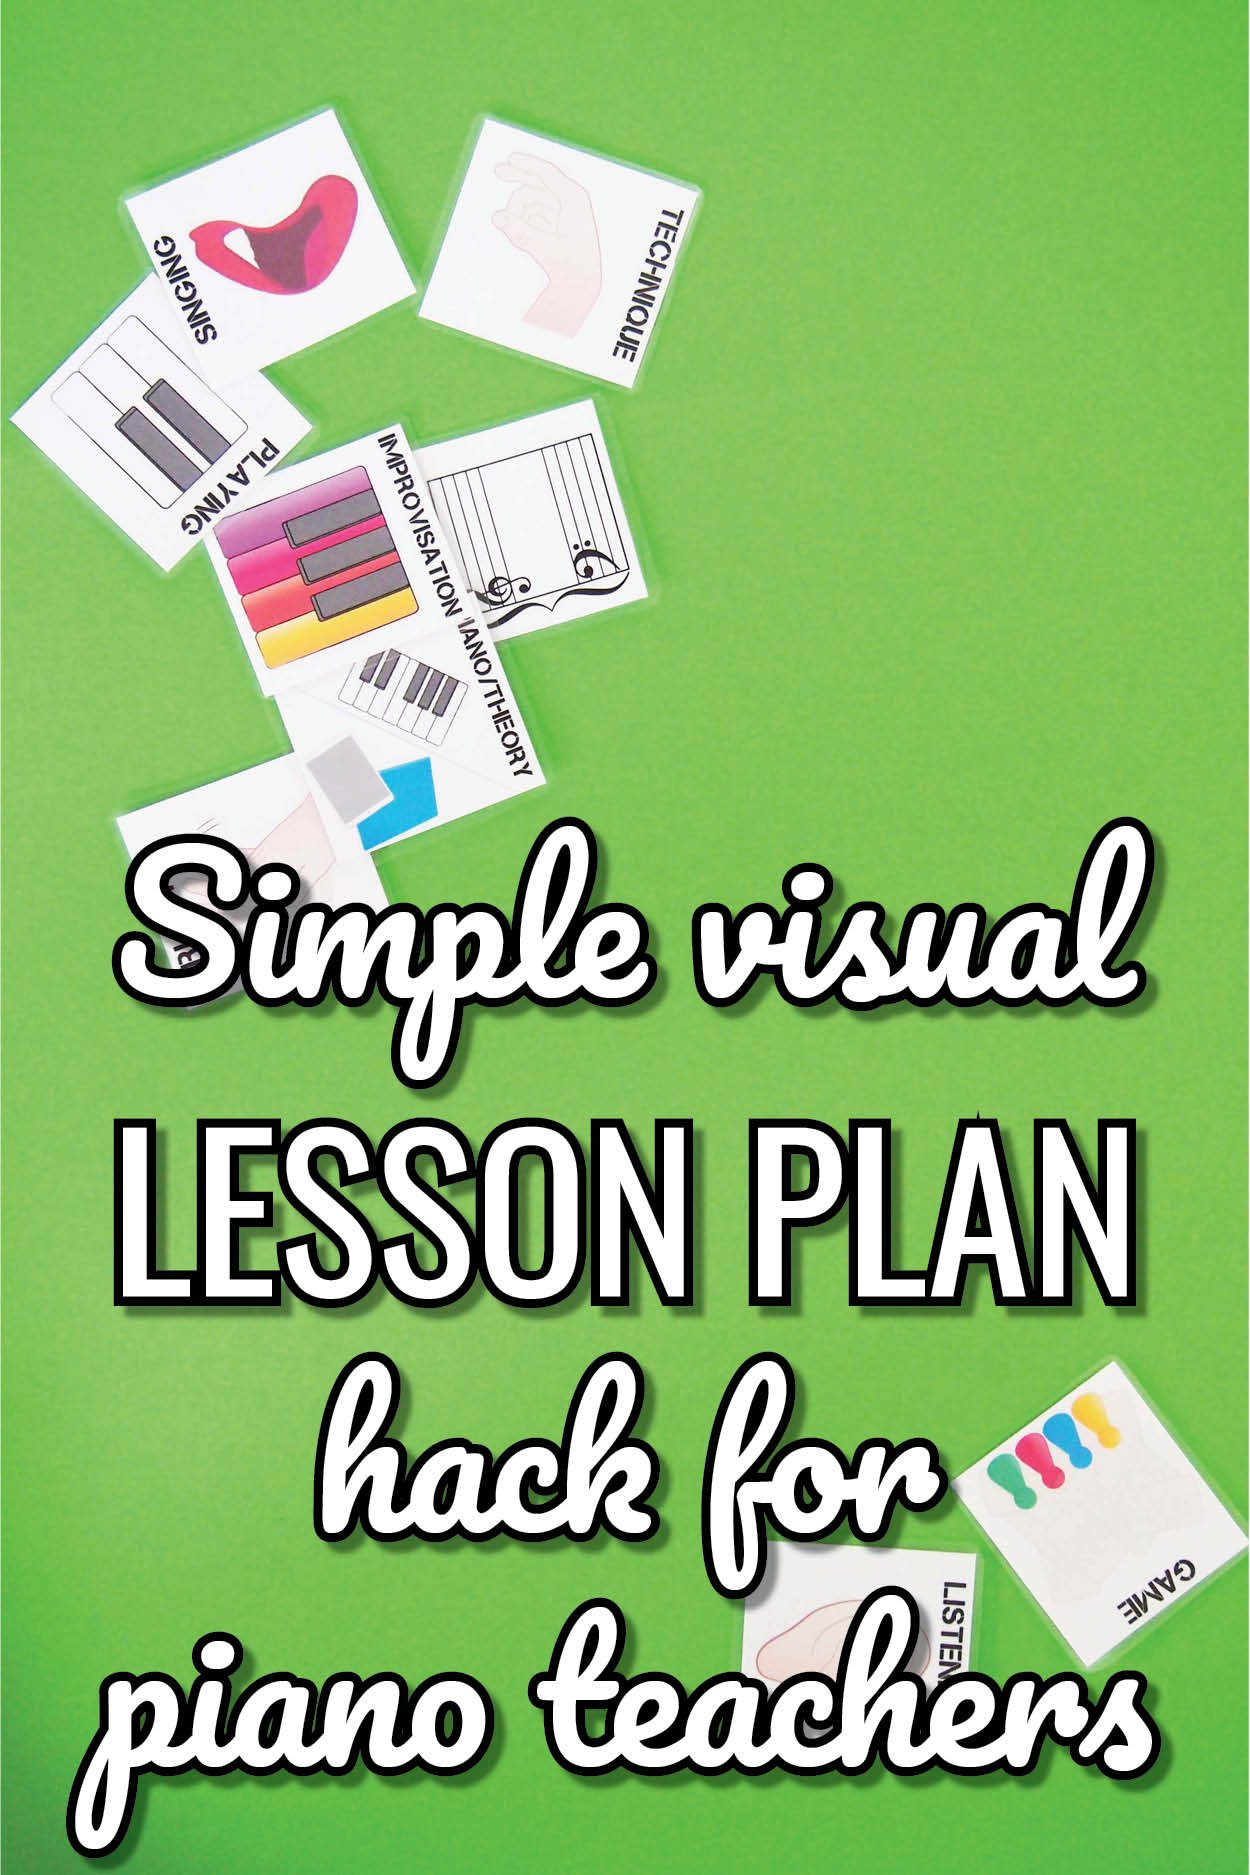 A simple hack using visual lesson planning for piano teachers